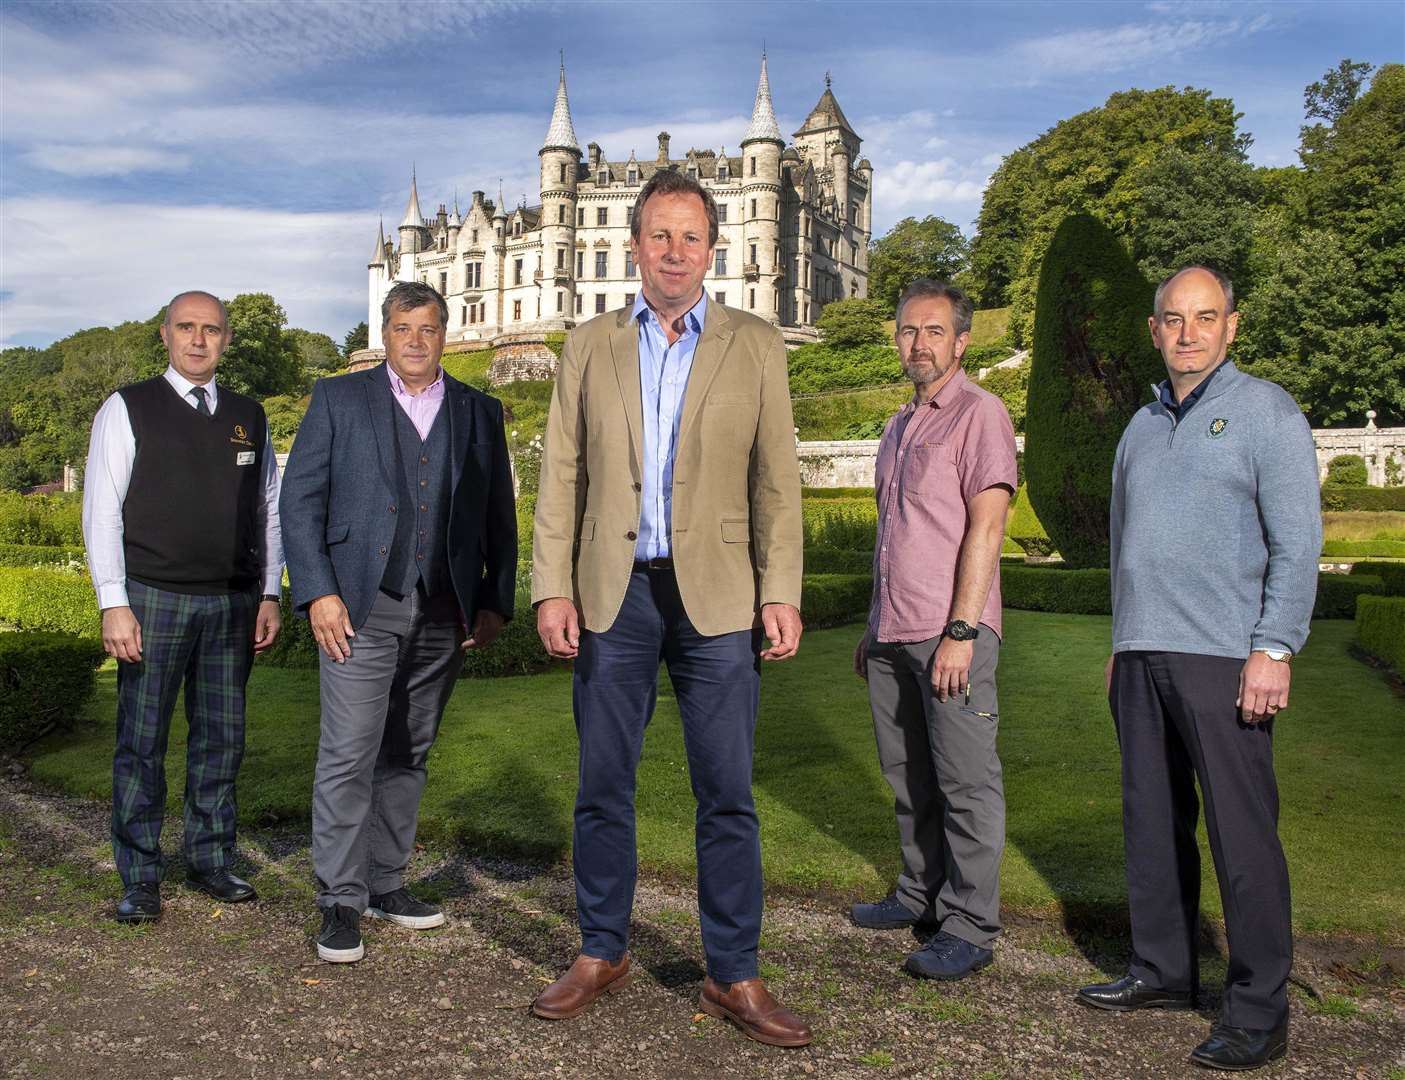 Highland business leaders at Dunrobin Castle calling for a North Highland Growth Fund from Holyrood and Westminster. From left – Scott Morrison (Dunrobin Castle); John Murray (Highland Food & Drink Club); David Whiteford (chairman of North Highland Initiative); Ian Sutherland (Go Golspie!) and Neil Hampton (Royal Dornoch Golf Club).